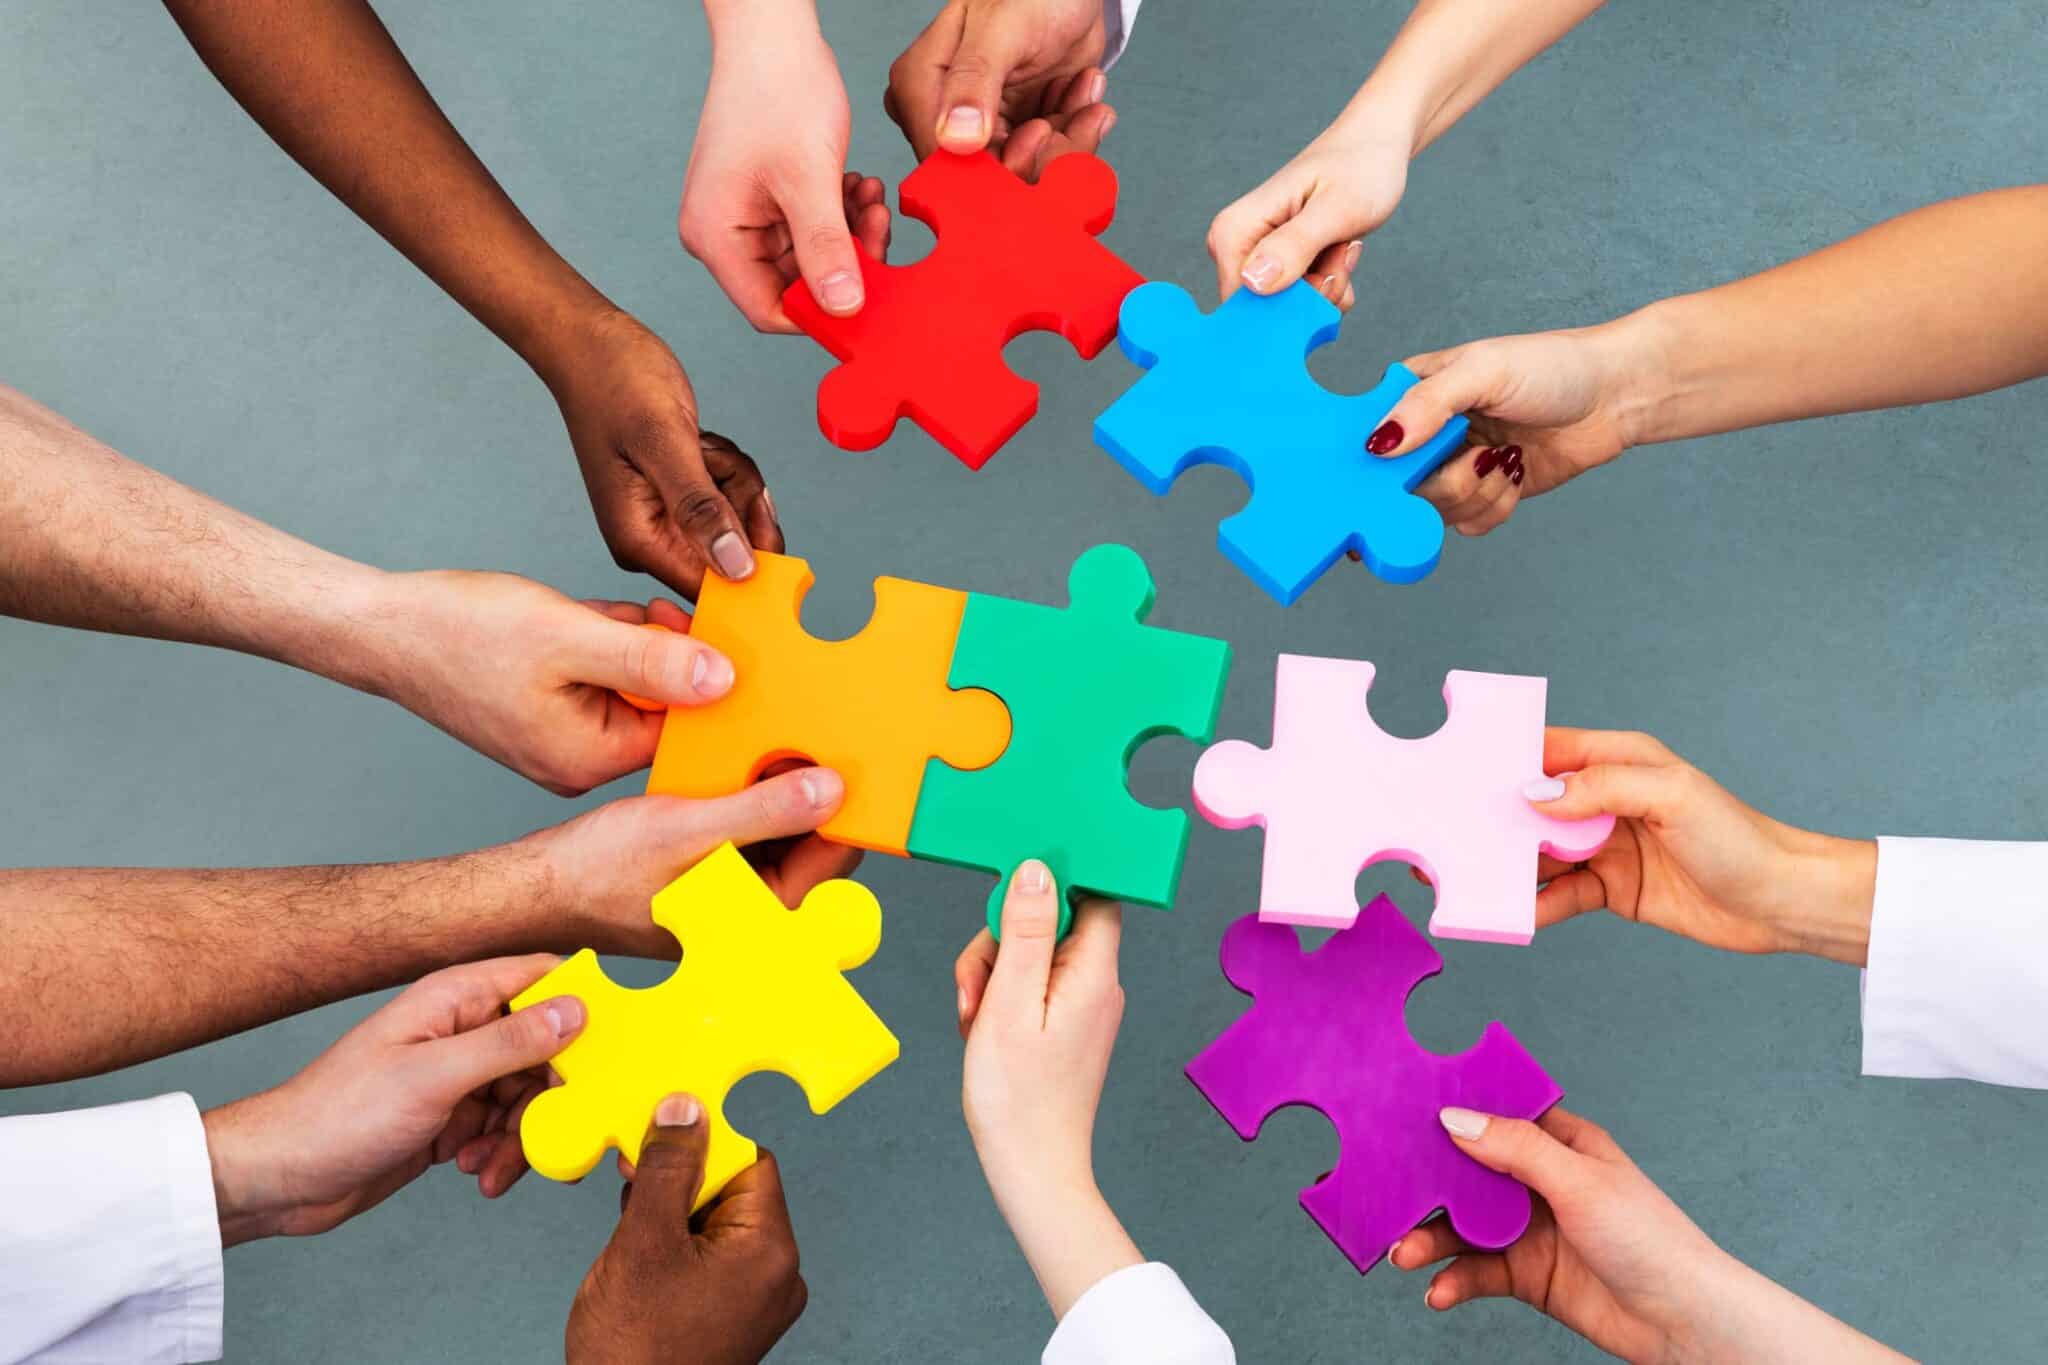 A diverse group of people promoting inclusivity by holding colorful puzzle pieces together.